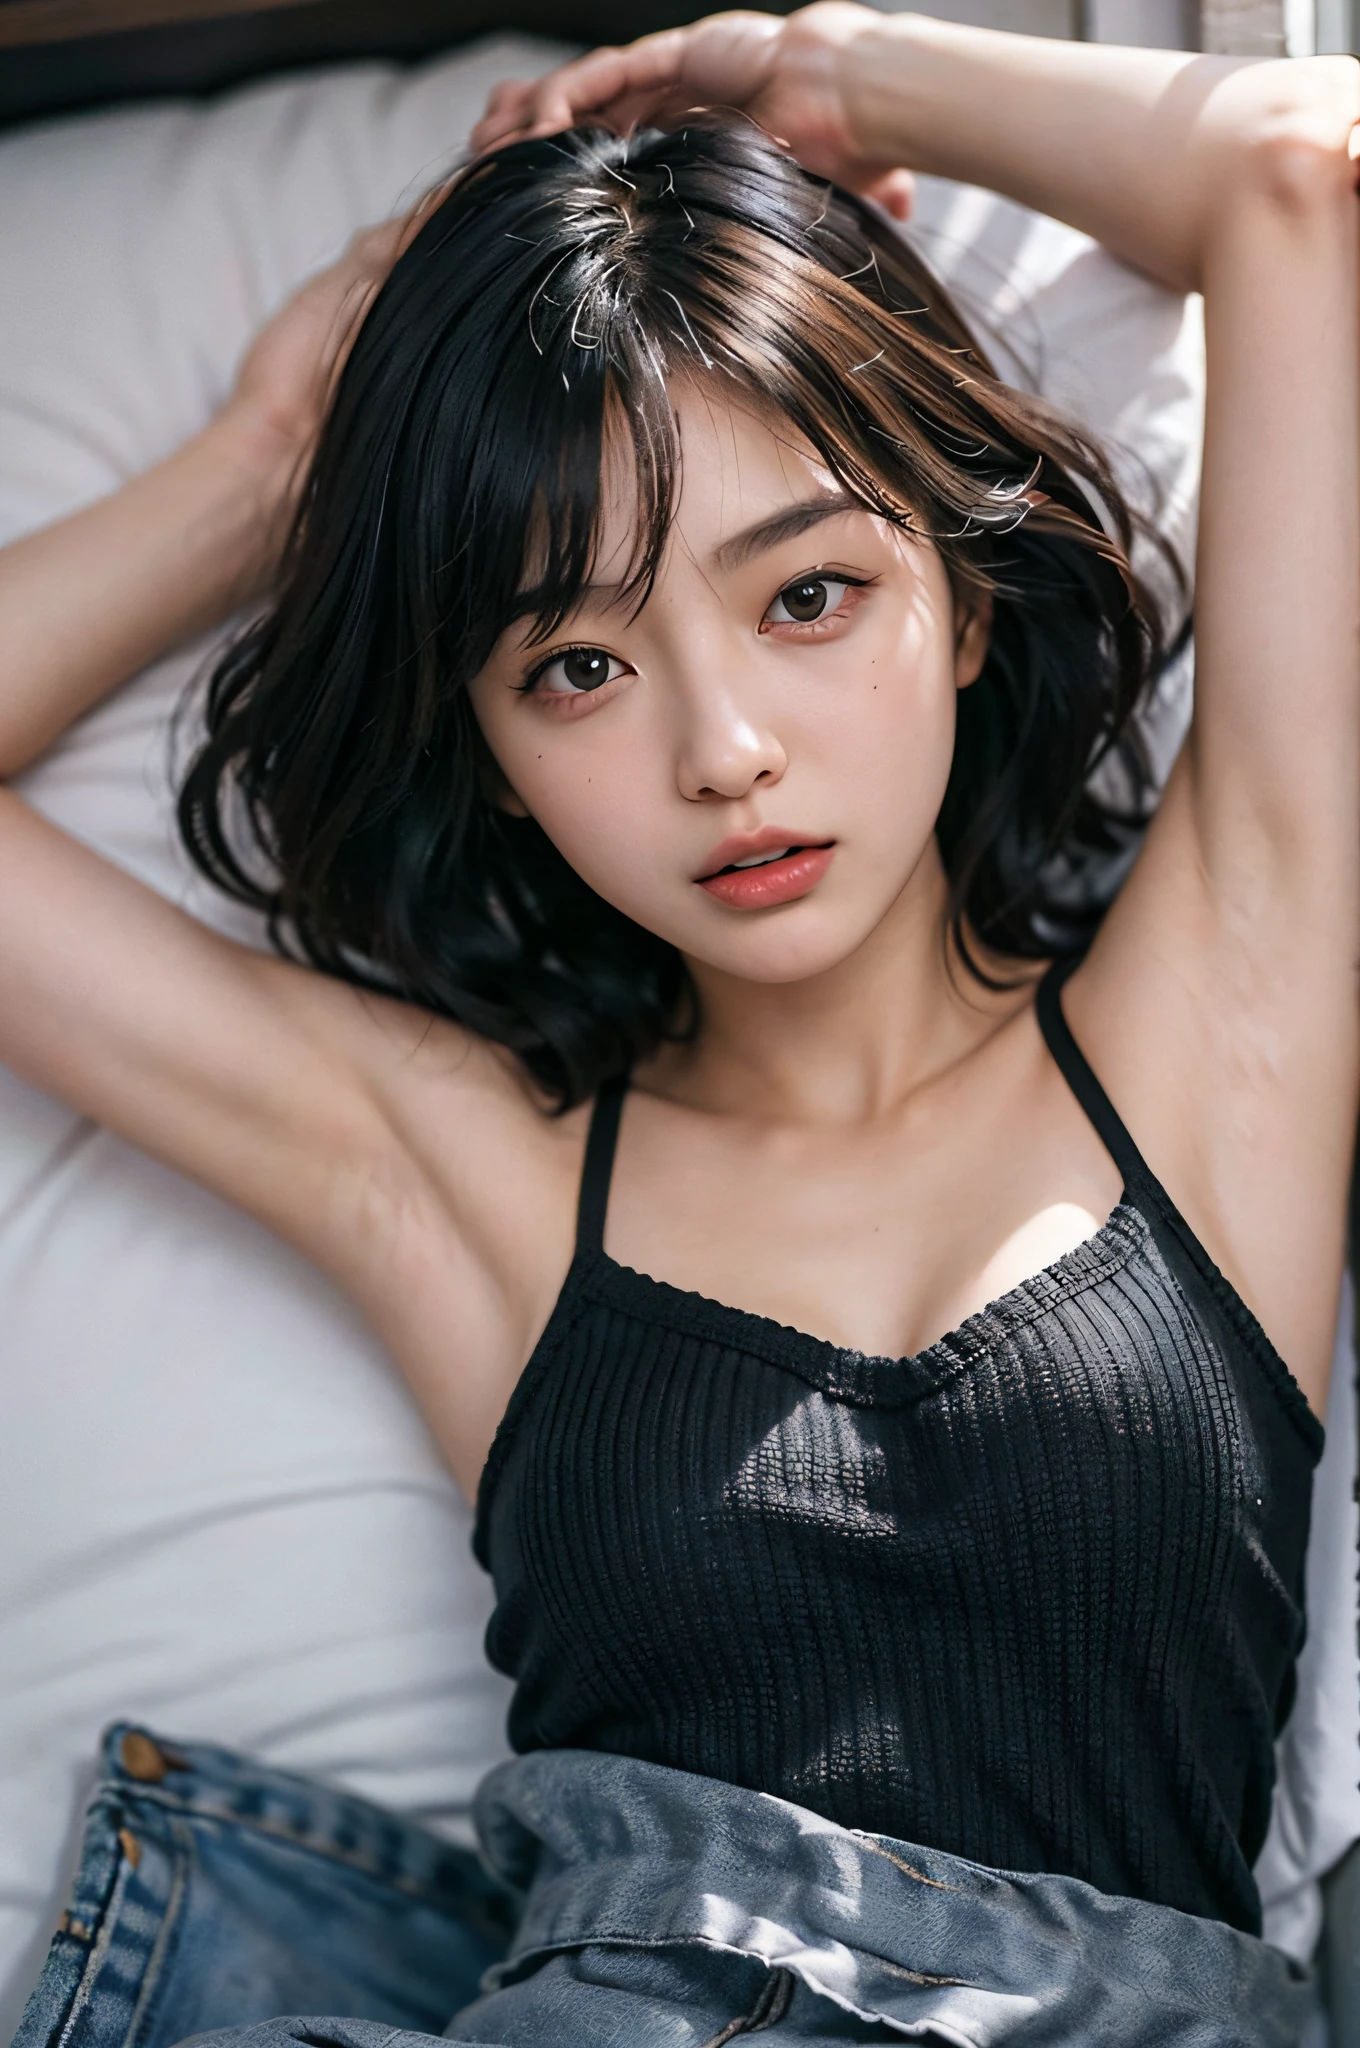 (top-quality、4K、​masterpiece:1.3)、An 18-year-old woman、1girl in、(breastsout、Attractive body:1.2)、Short and medium hair、Clean armpits、sticking out the tongue、Super Detail Face、Detail Lip、Detail Eye、double eyelid、Wear knitwear without sleeves、Japan Person Model、Split Shot、Bedrooms、lying on one's side on bed